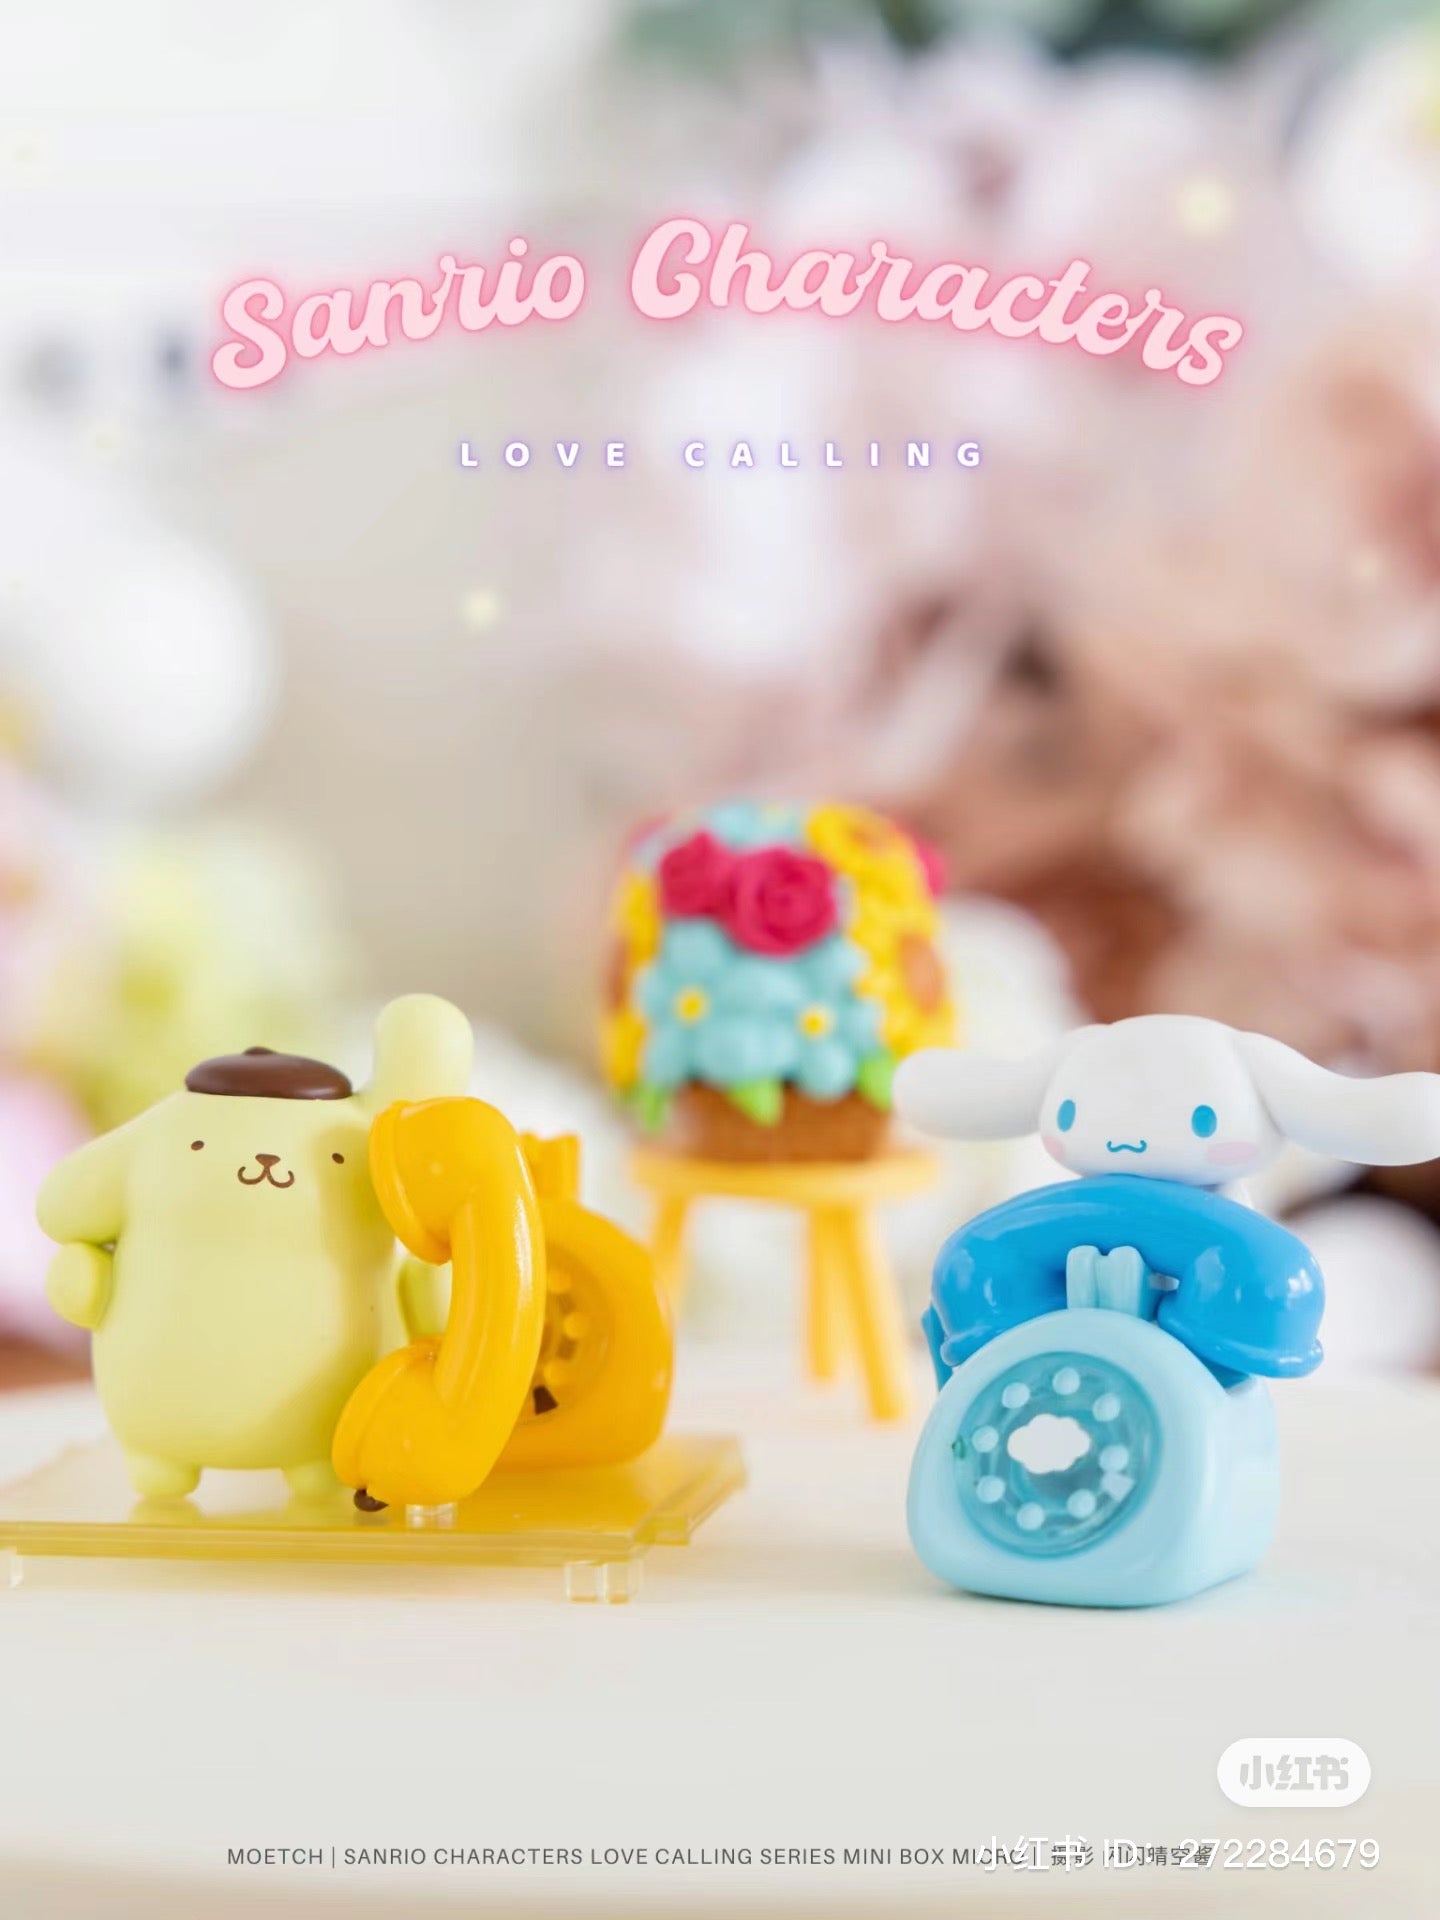 Sanrio characters Love Calling Series Mini Box Micro Blind Box Series, featuring various small toys including a toy phone, toy bear, and blue pacifier.